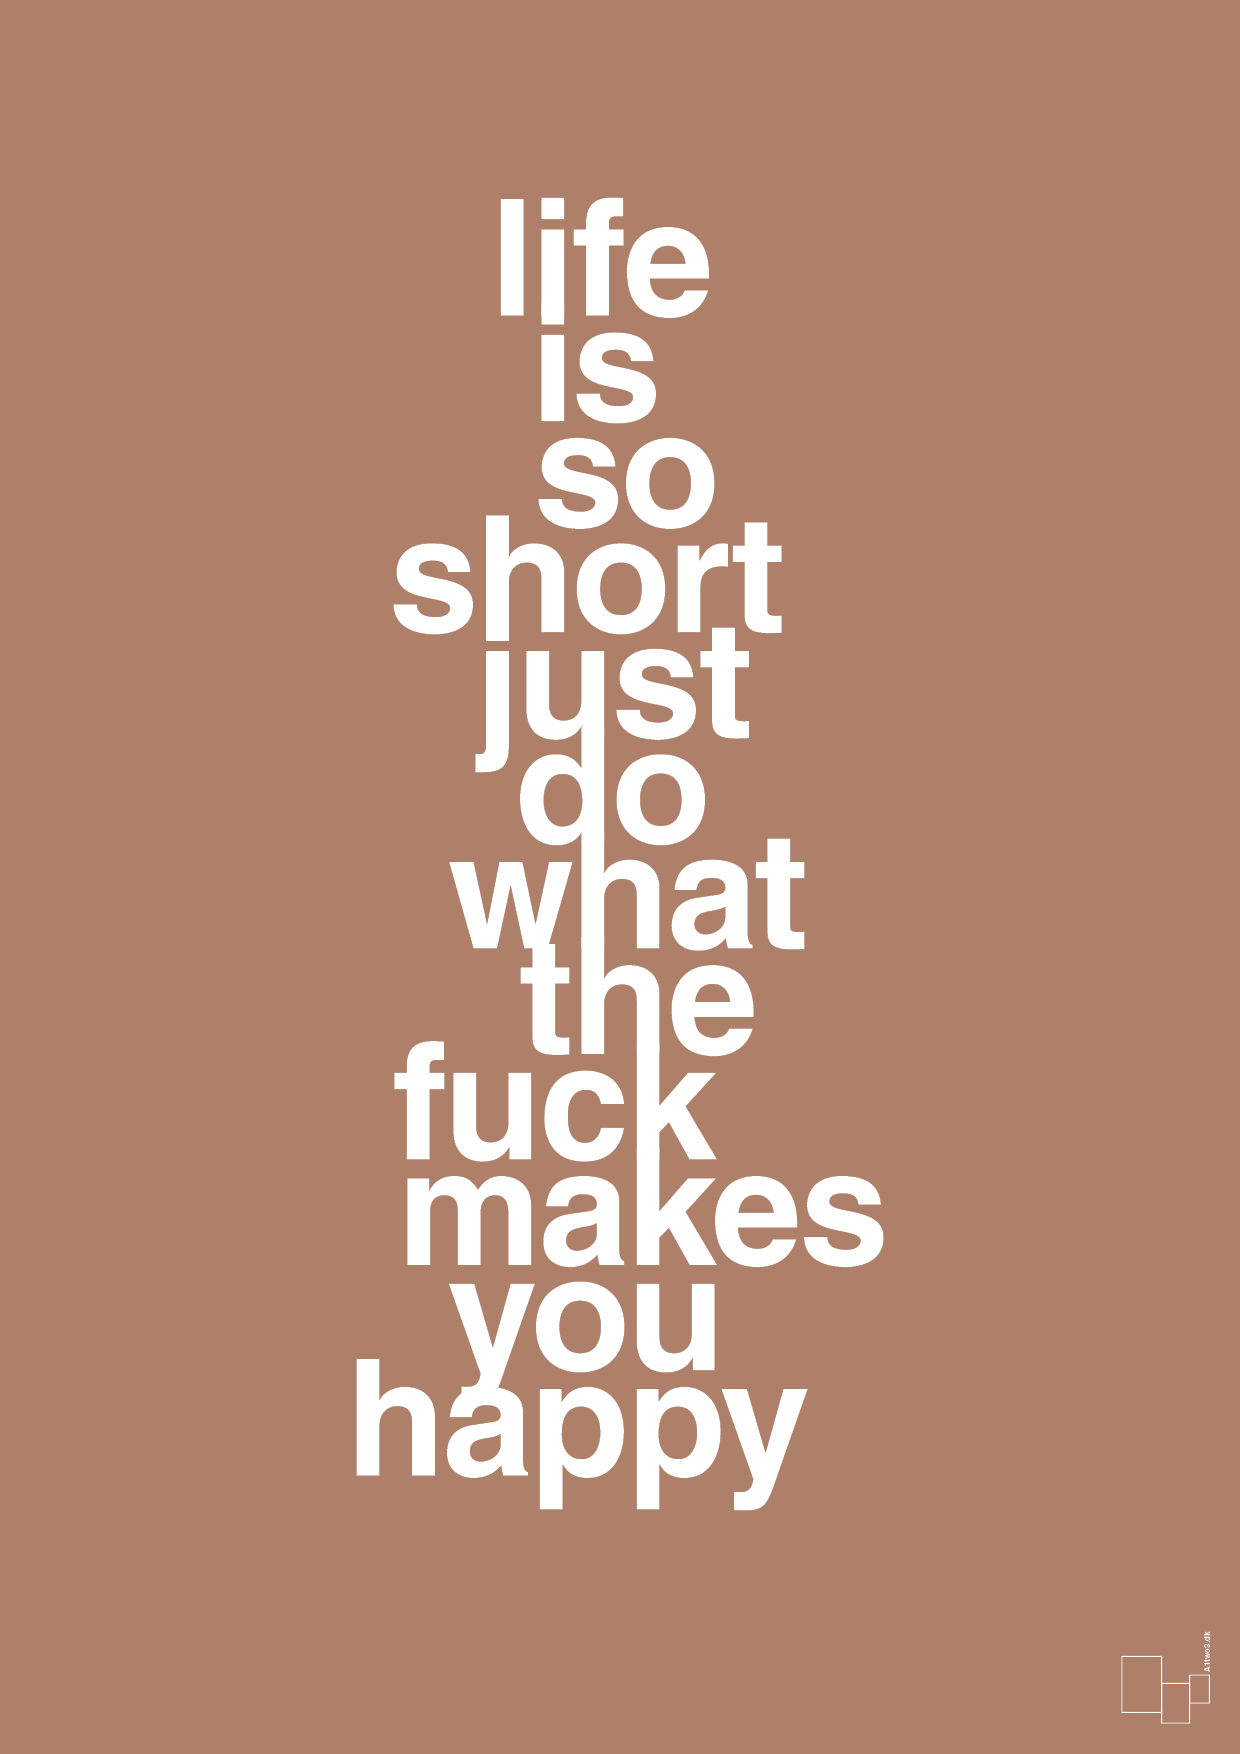 life is so short just do what the fuck makes you happy - Plakat med Ordsprog i Cider Spice